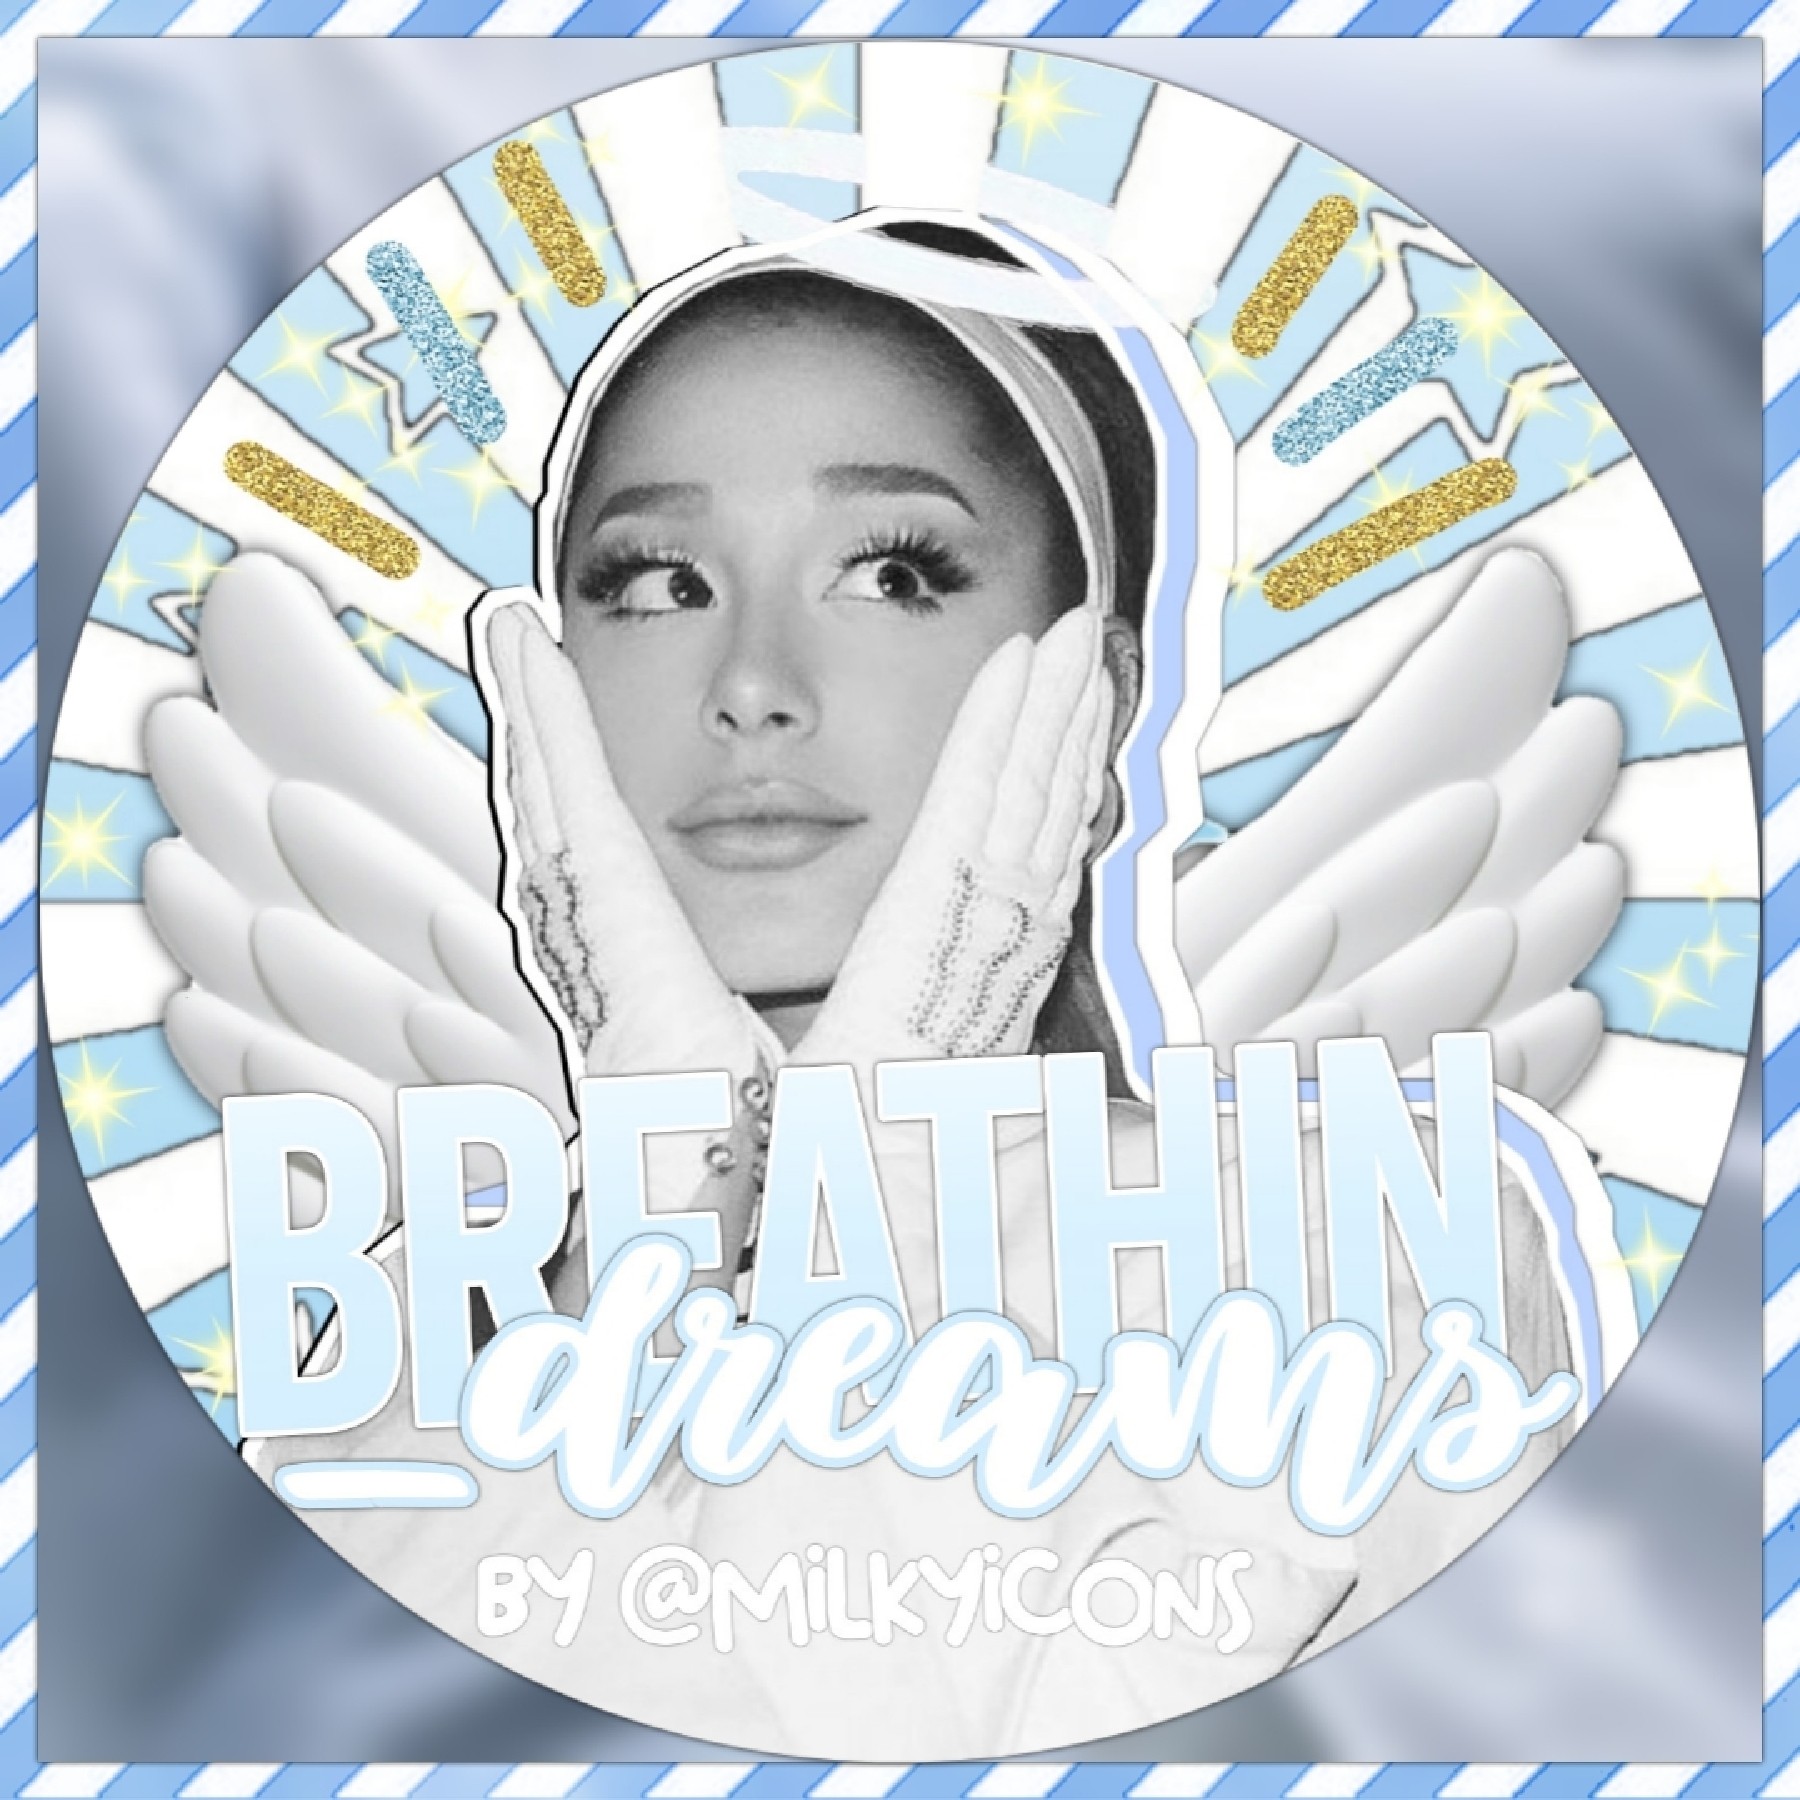 icon for: @Breathin_Dreams
style: simple
color: light blue (angel core) ☁️
hope you like it! pls give credits if used❤️😇